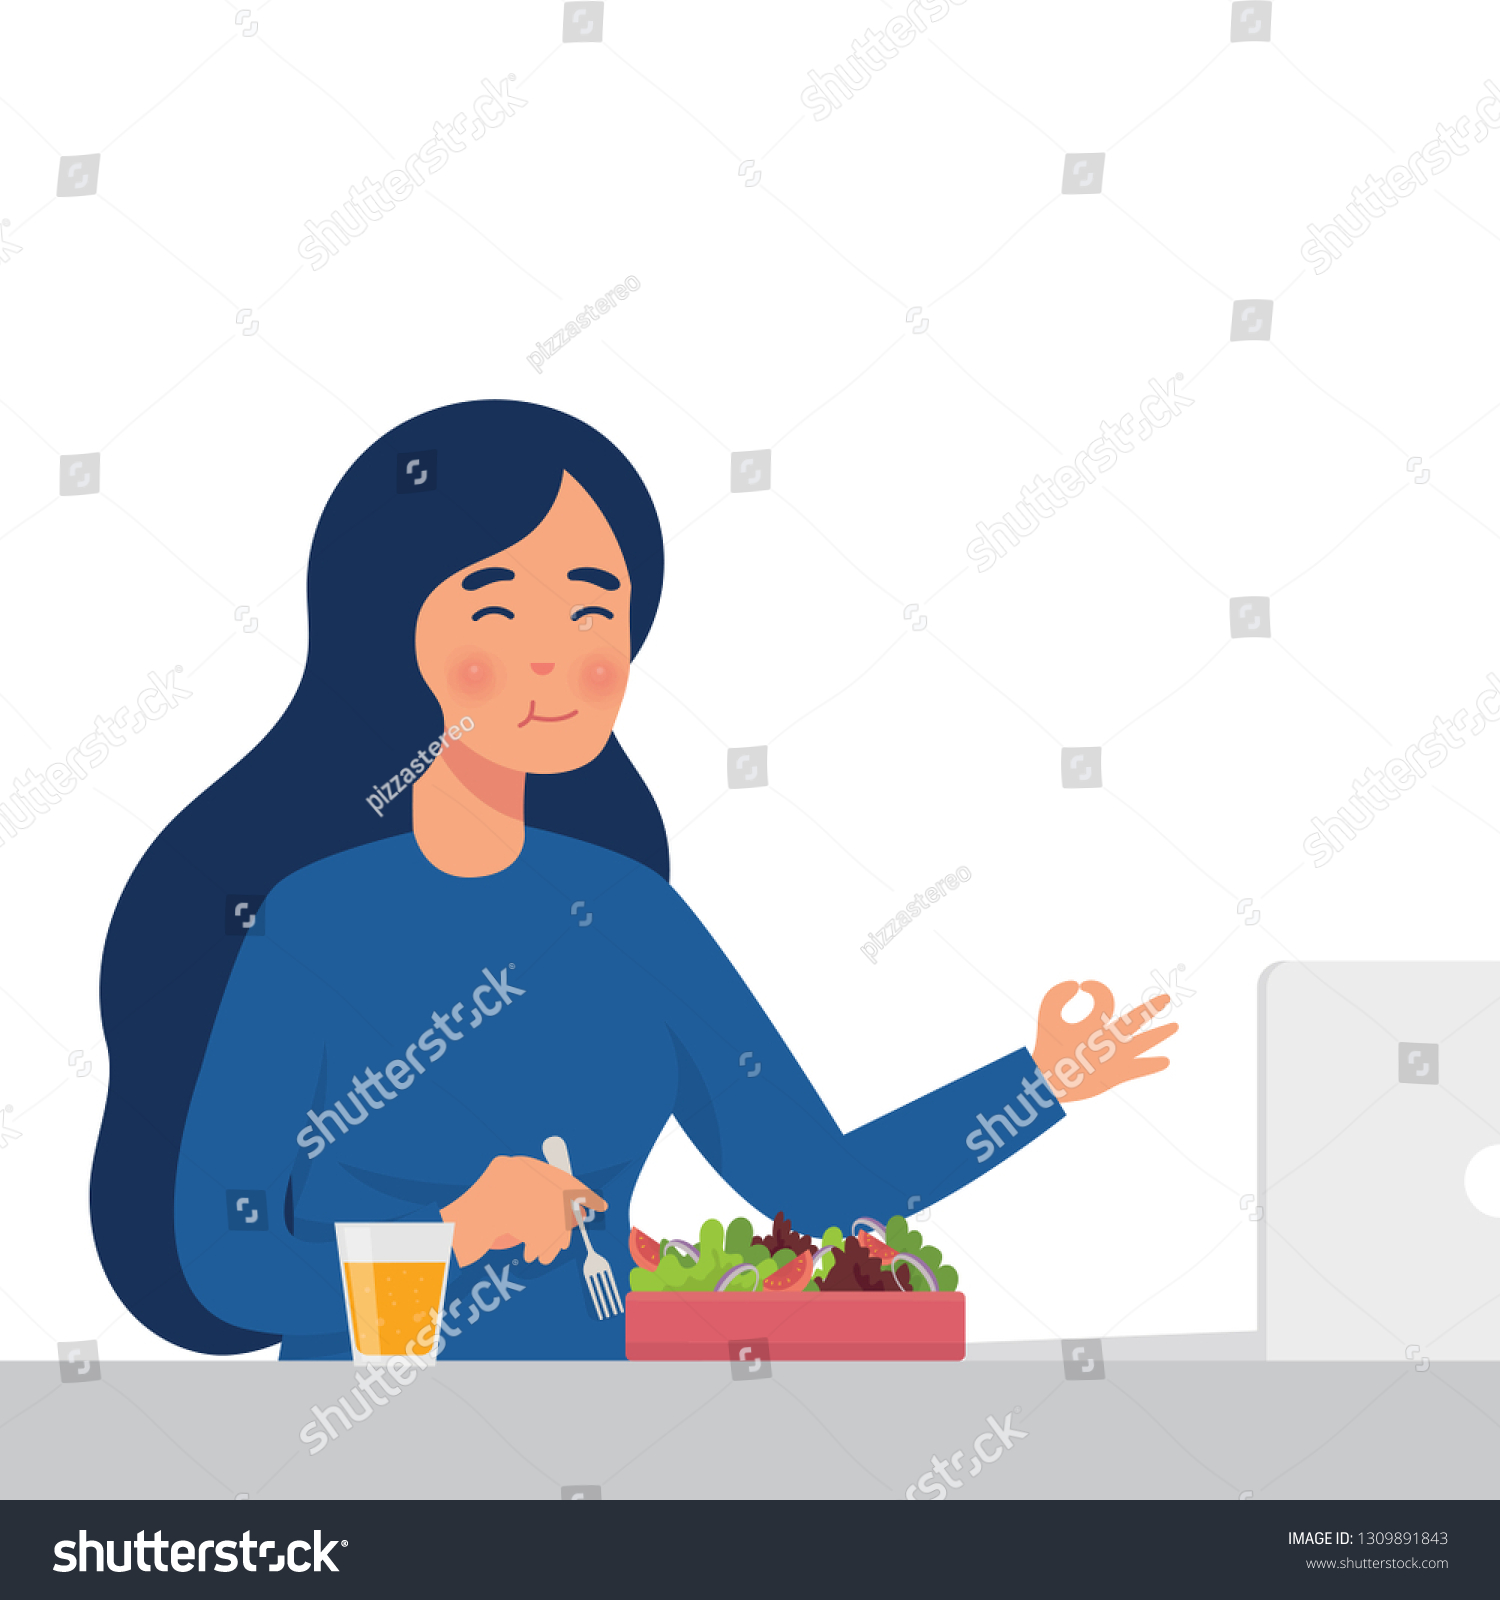 vector illustration young worker eat salad in her office, healthy lifestyle illustration of woman eat raw vegetables for lunch #1309891843